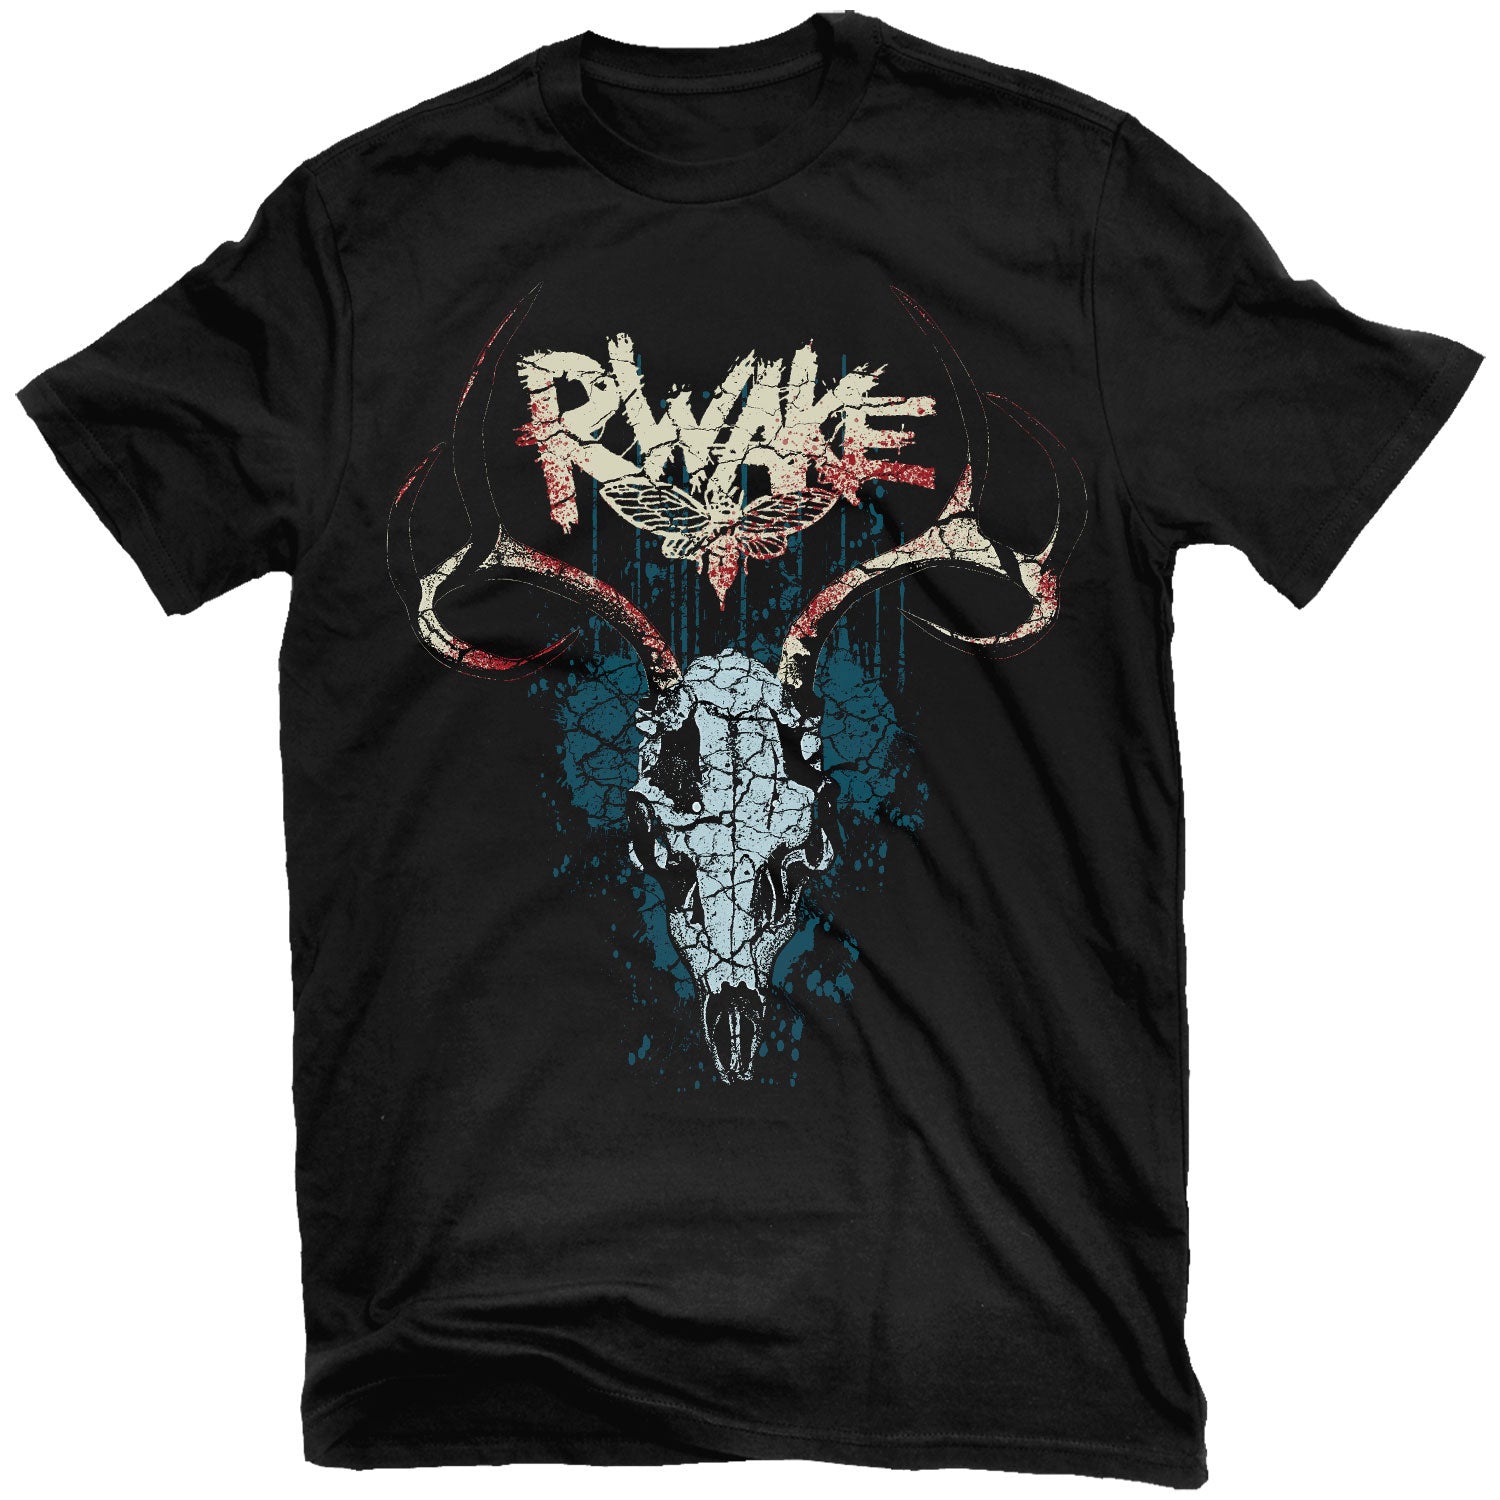 Rwake "Voices Of Omens " T-Shirt